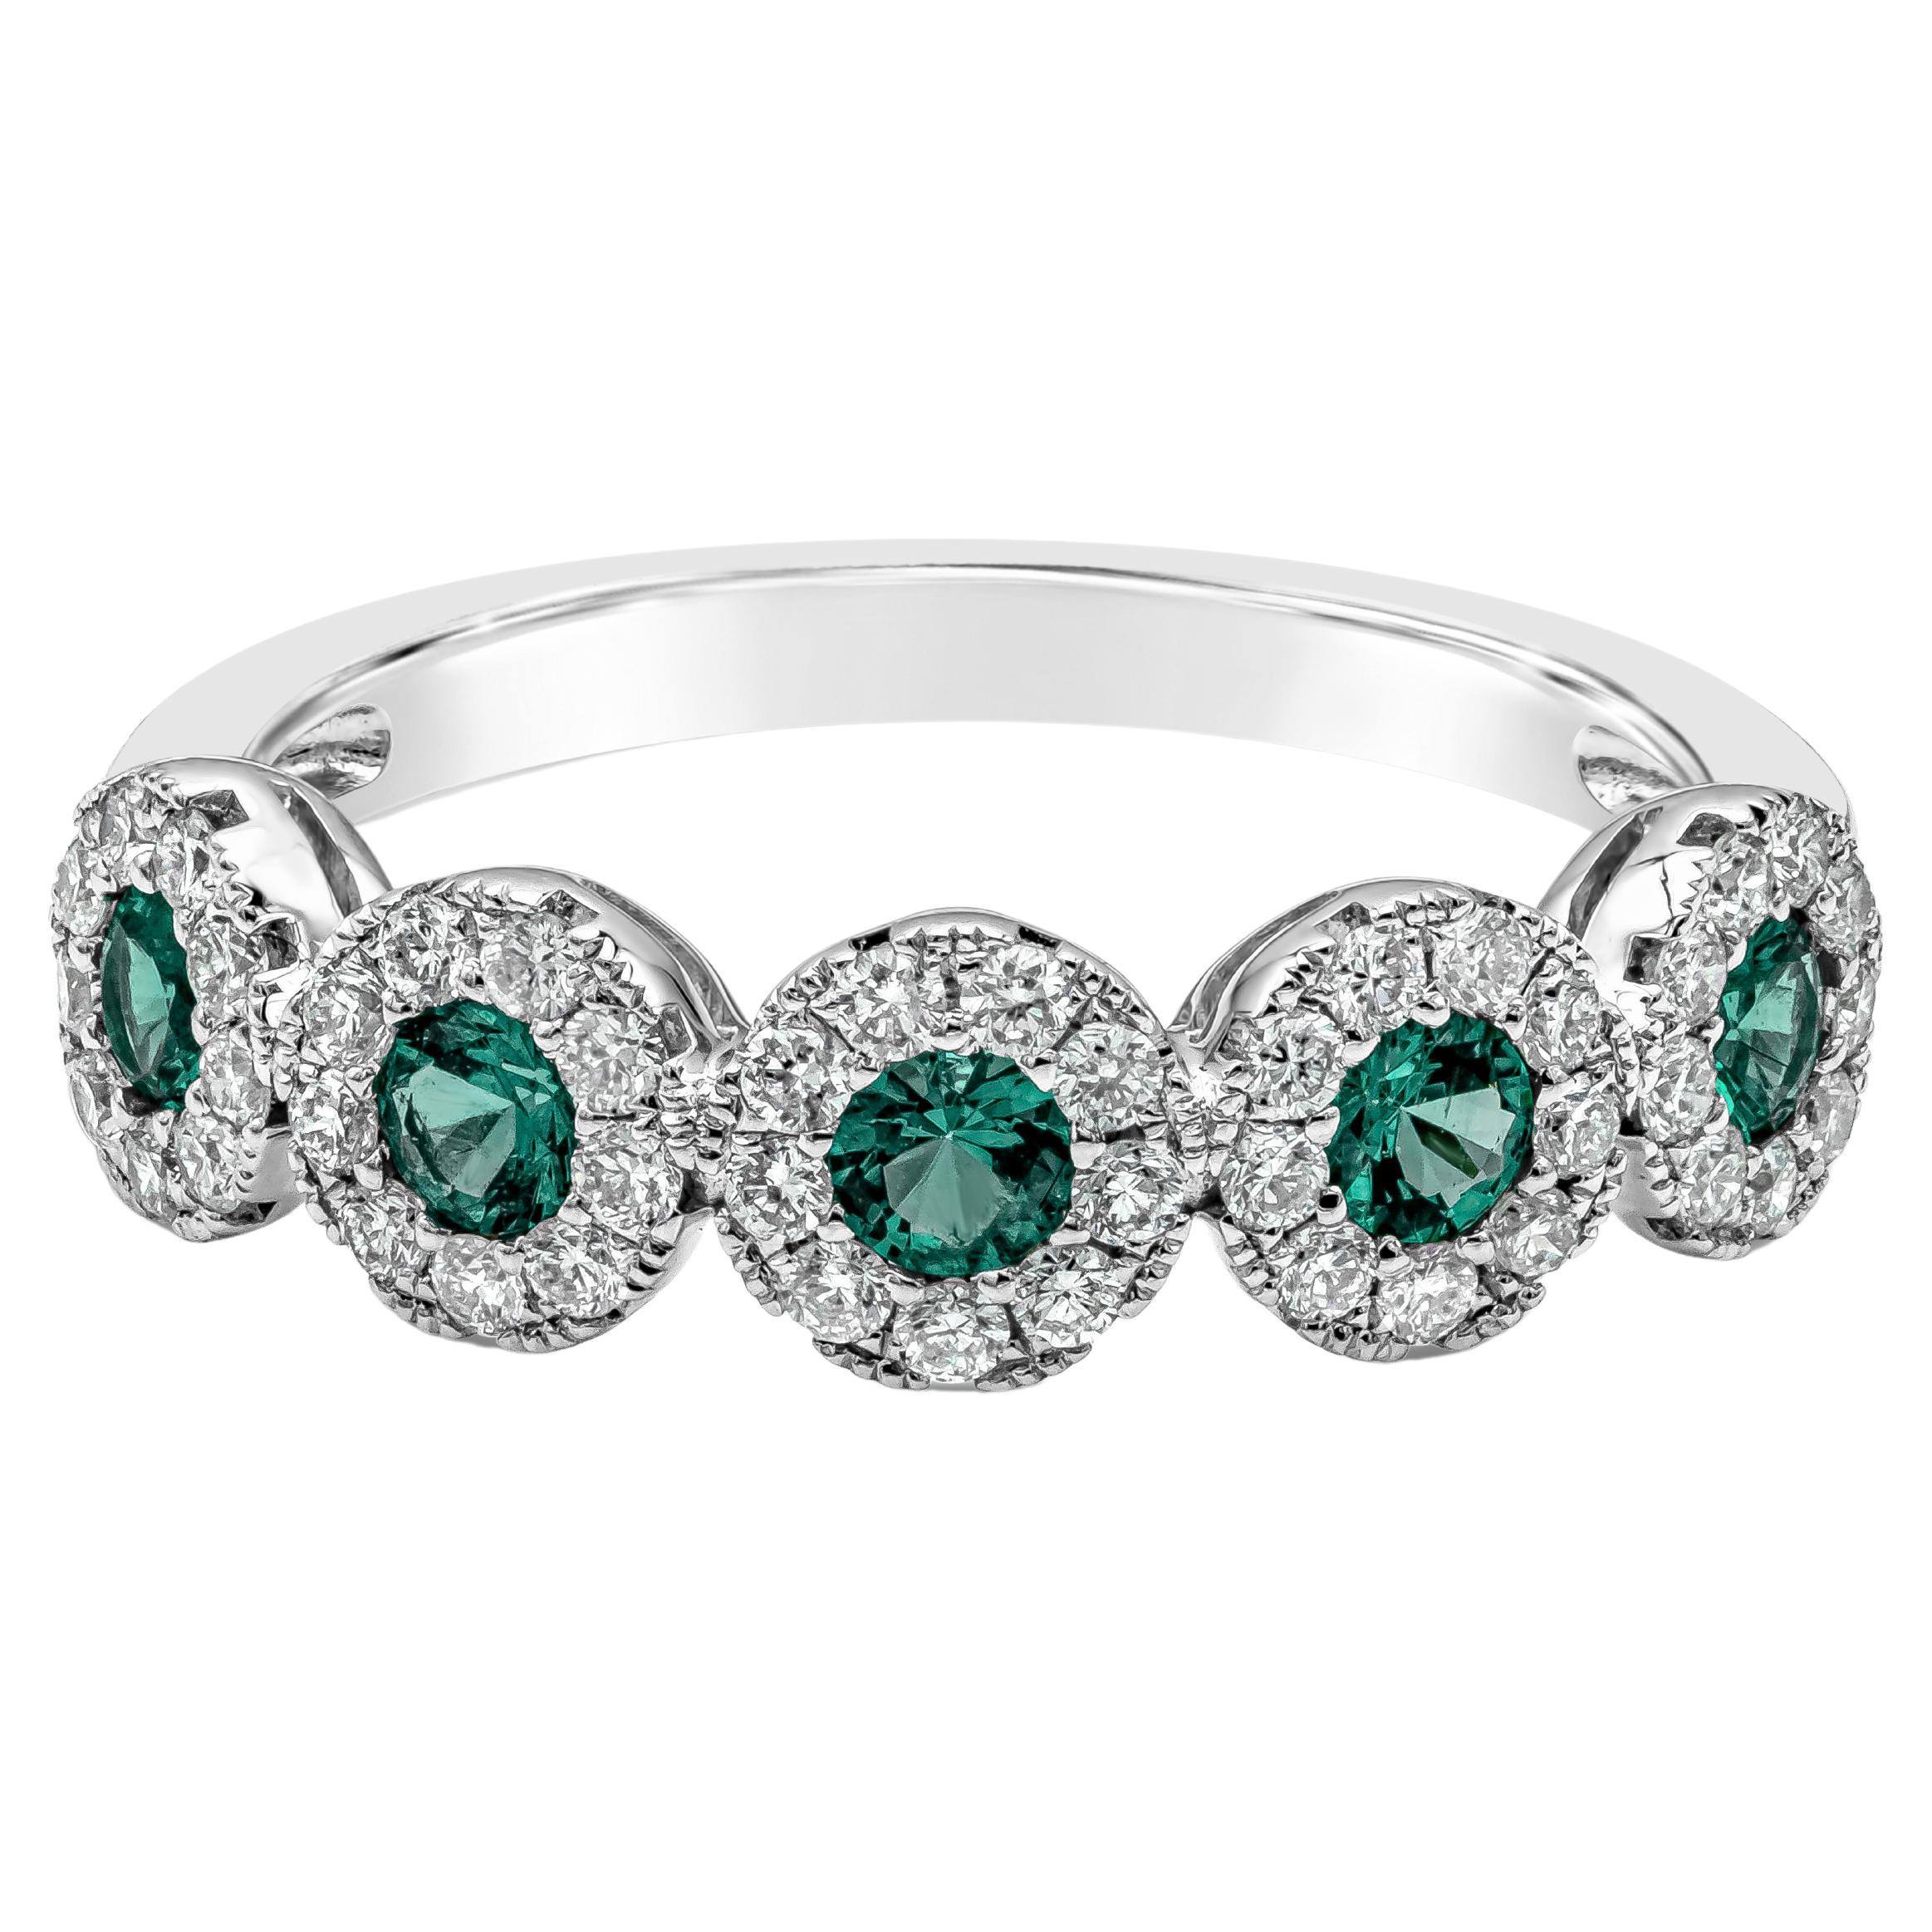 Roman Malakov, 0.35 Carat Total Green Emerald Five Stone Ring in White Gold For Sale